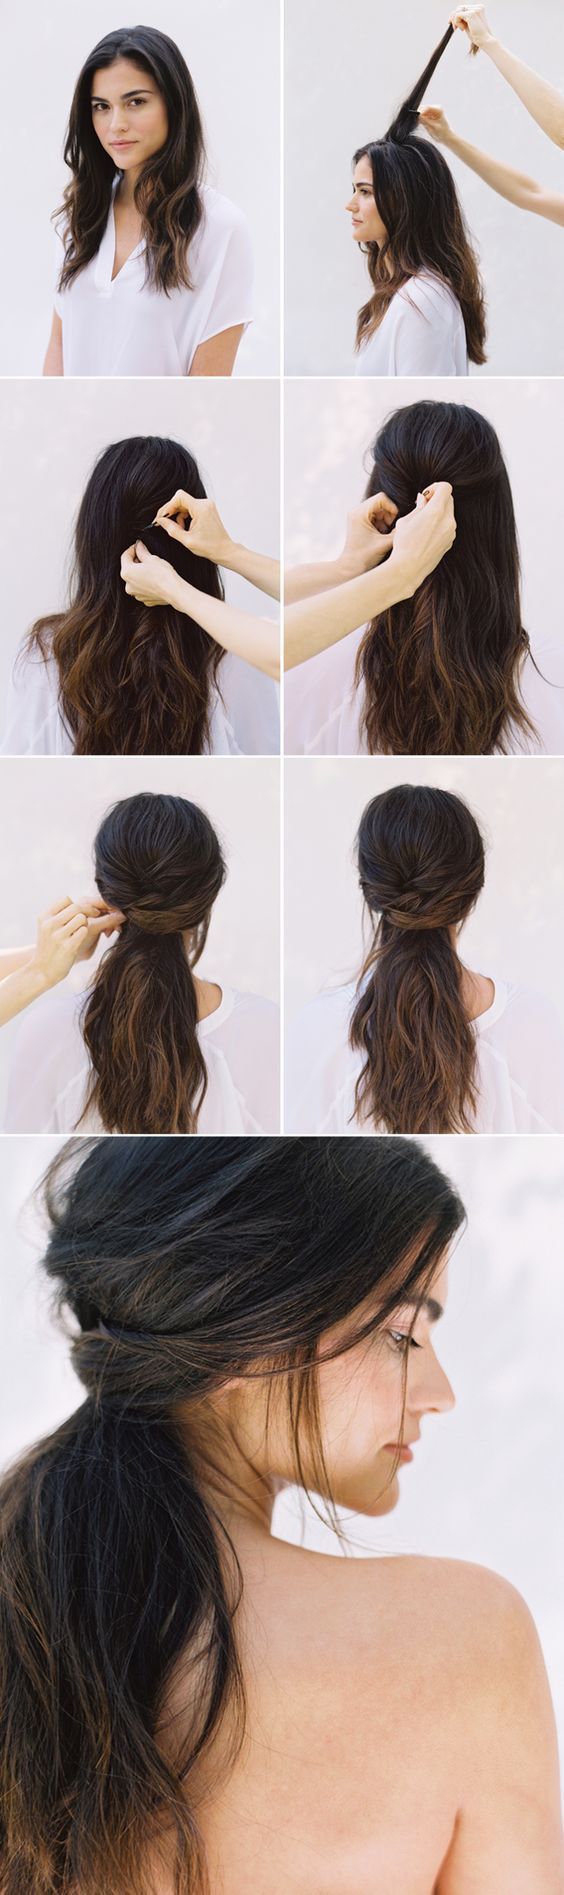 Beauty tips, step by step low ponytail tutorial.